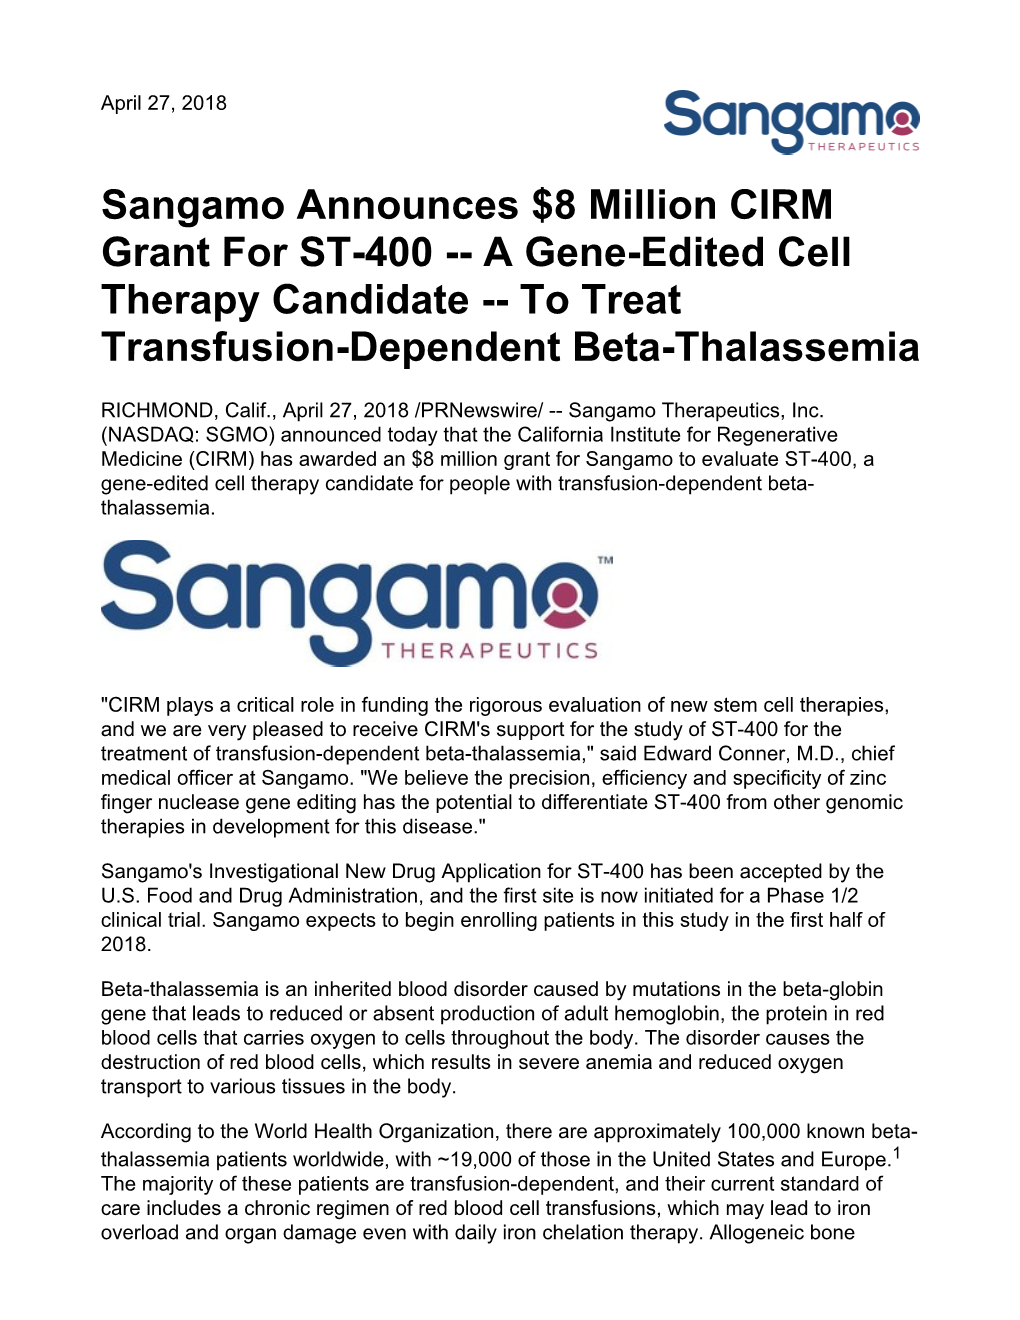 Sangamo Announces $8 Million CIRM Grant for ST-400 -- a Gene-Edited Cell Therapy Candidate -- to Treat Transfusion-Dependent Beta-Thalassemia